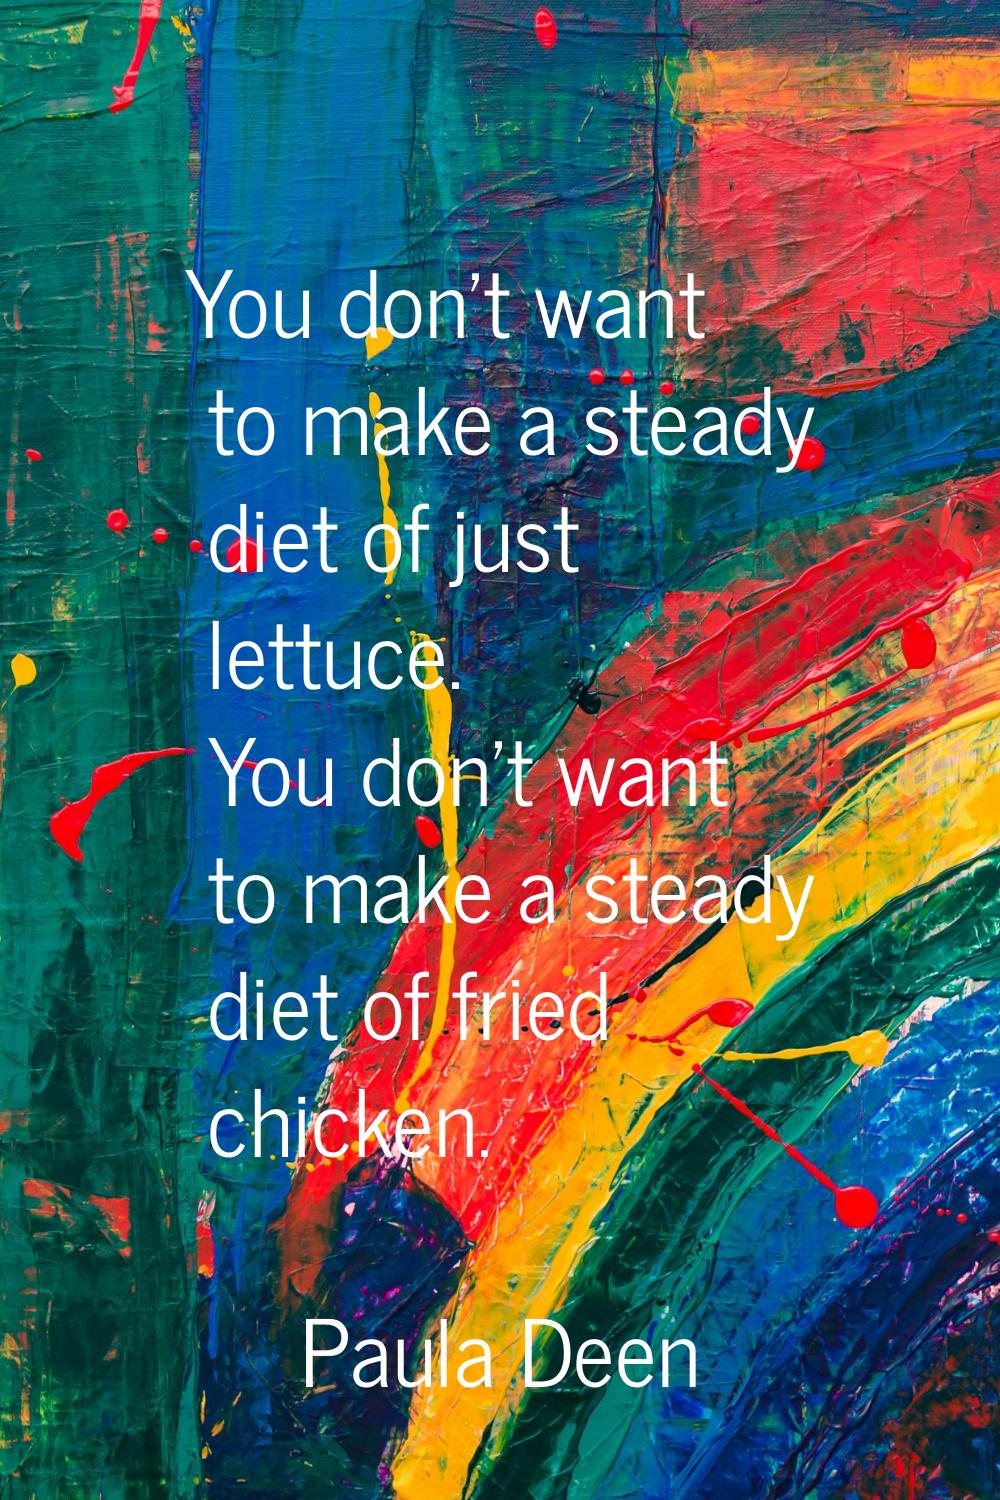 You don't want to make a steady diet of just lettuce. You don't want to make a steady diet of fried